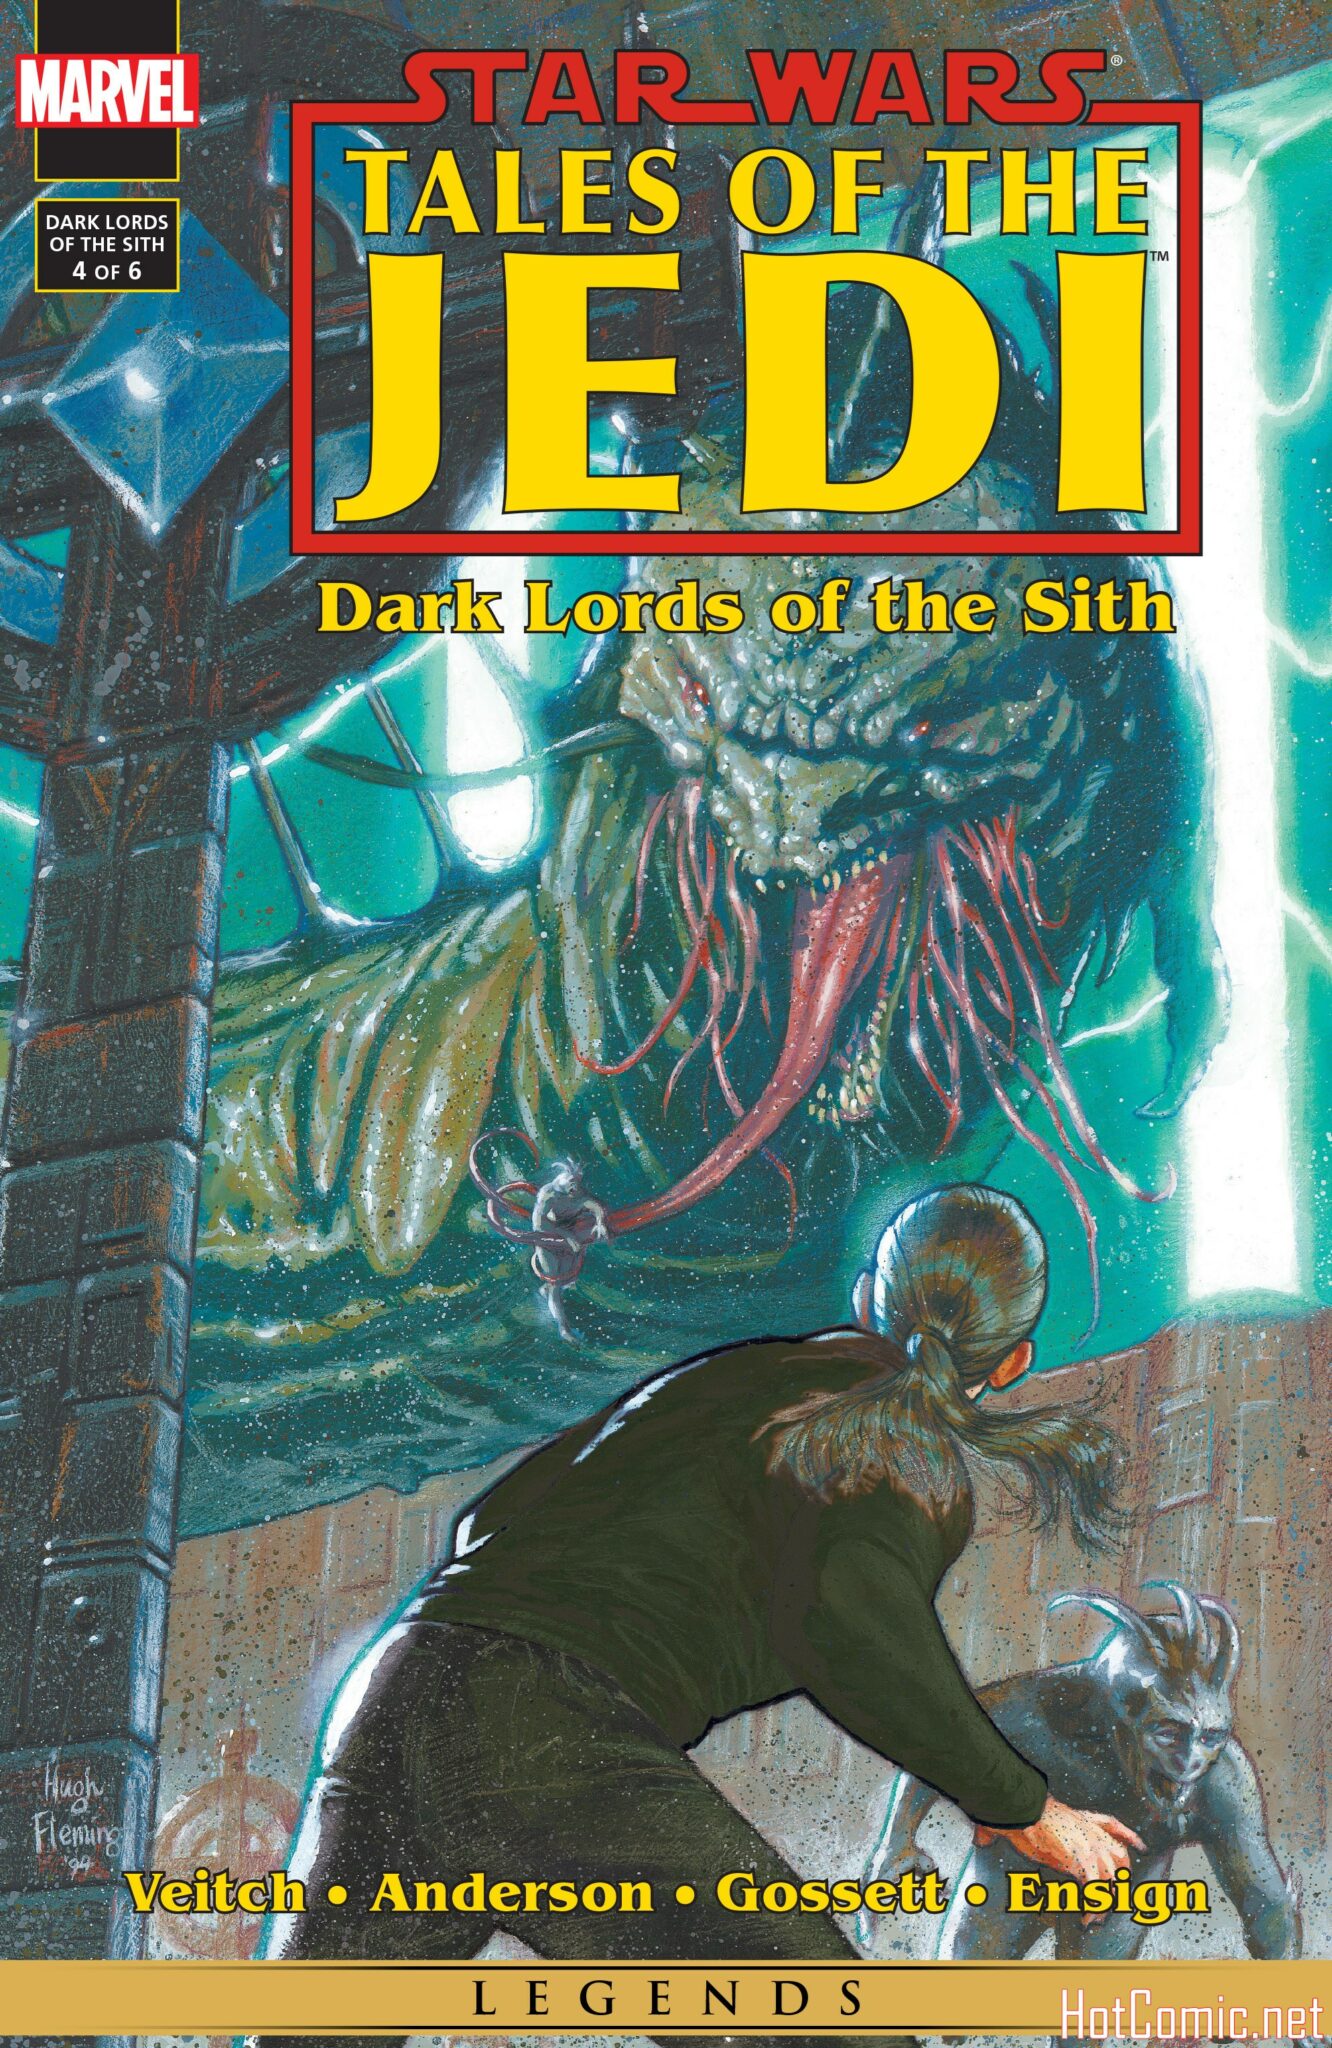 Star Wars: Tales of the Jedi - Dark Lords of the Sith